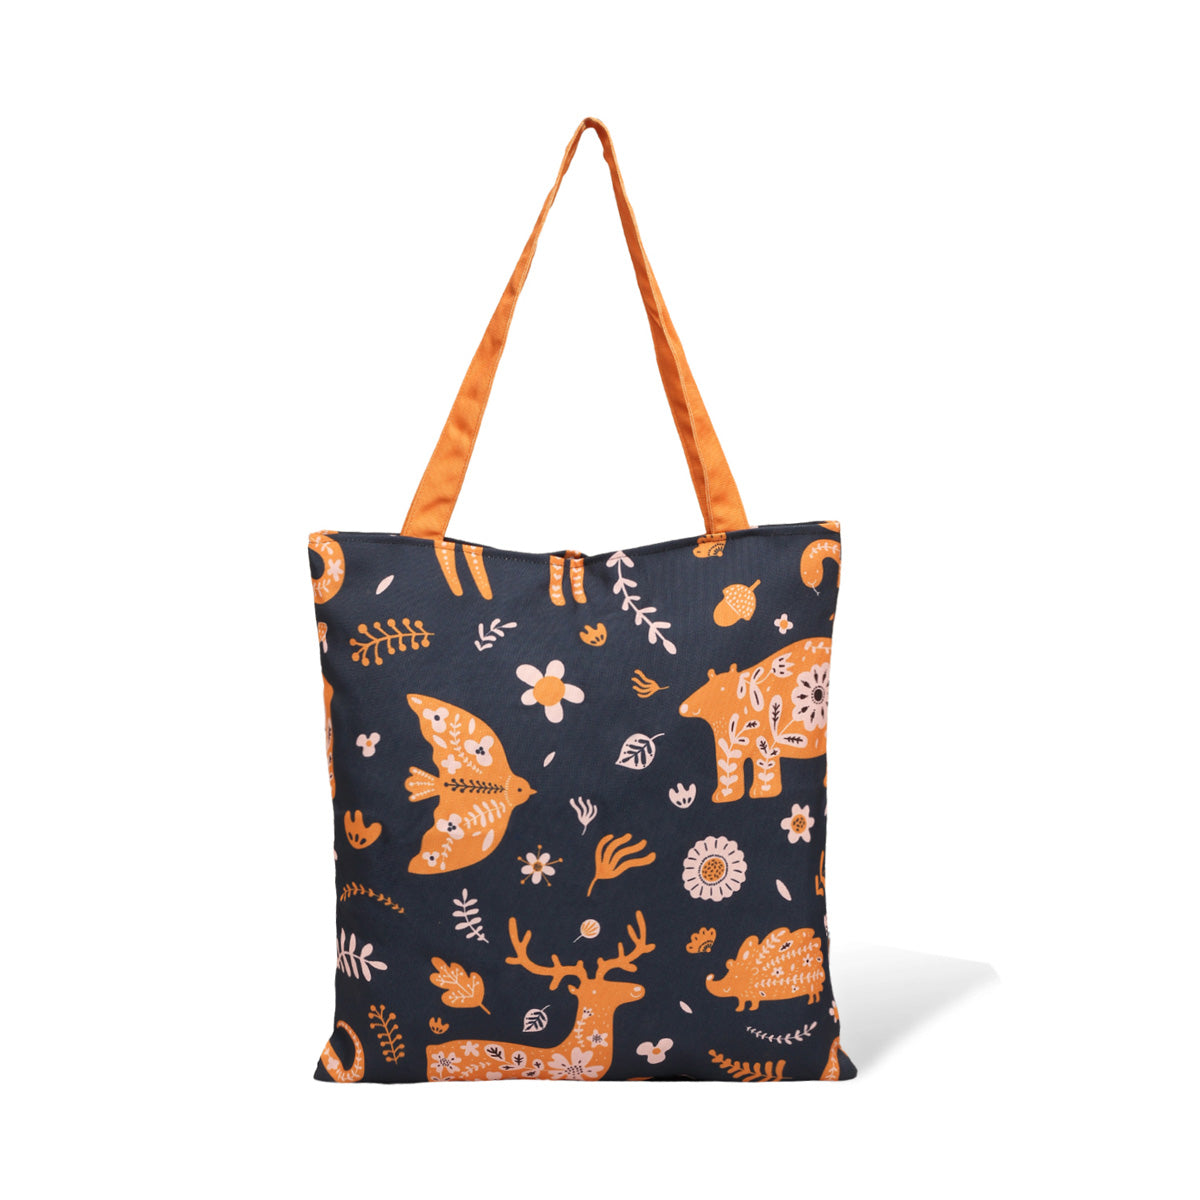 A black tote bag with orange and white animal and plant print designs, featuring deer, fish, and flowers, with orange handles.